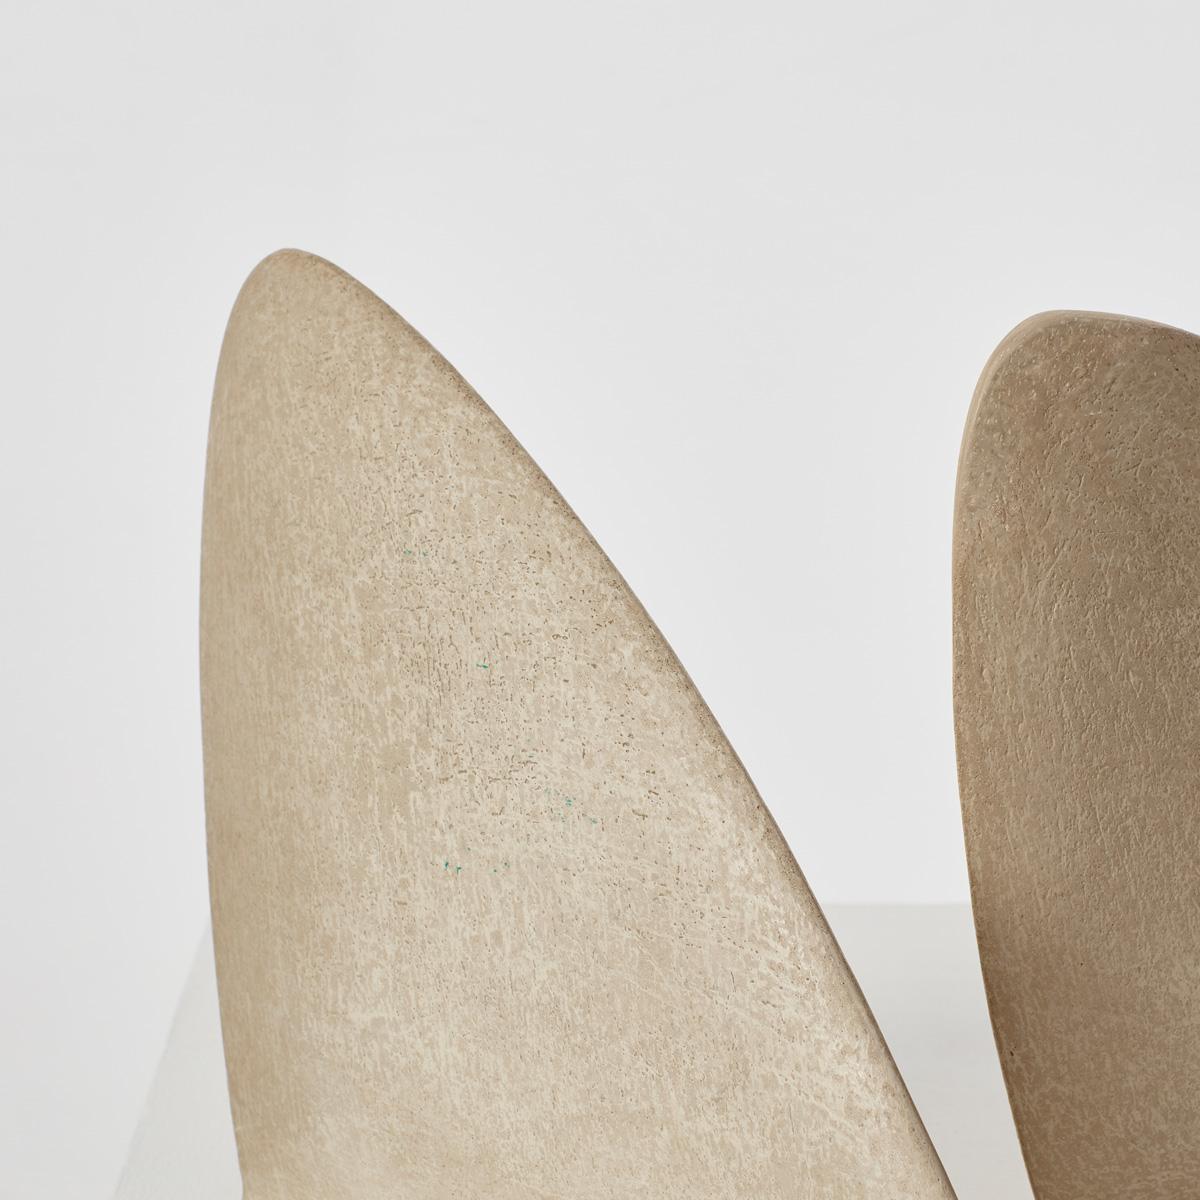 Plaster Set of Three ‘Shark Fin’ Sculptures from the Collection of Sir Terence Conran For Sale